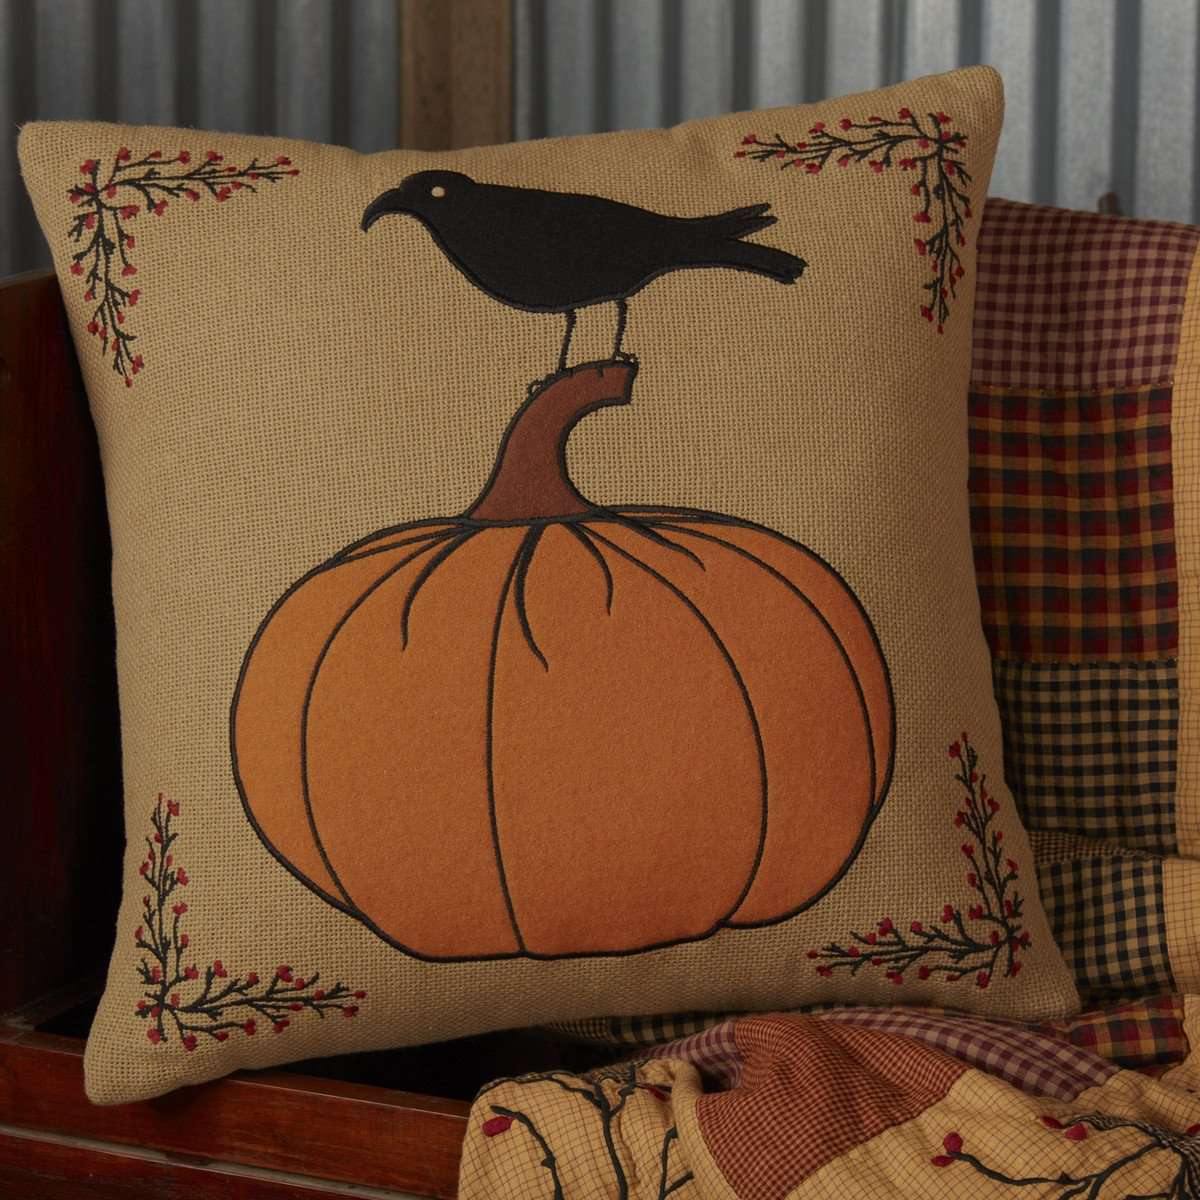 Heritage Farms Pumpkin and Crow Pillow 18x18 VHC Brands